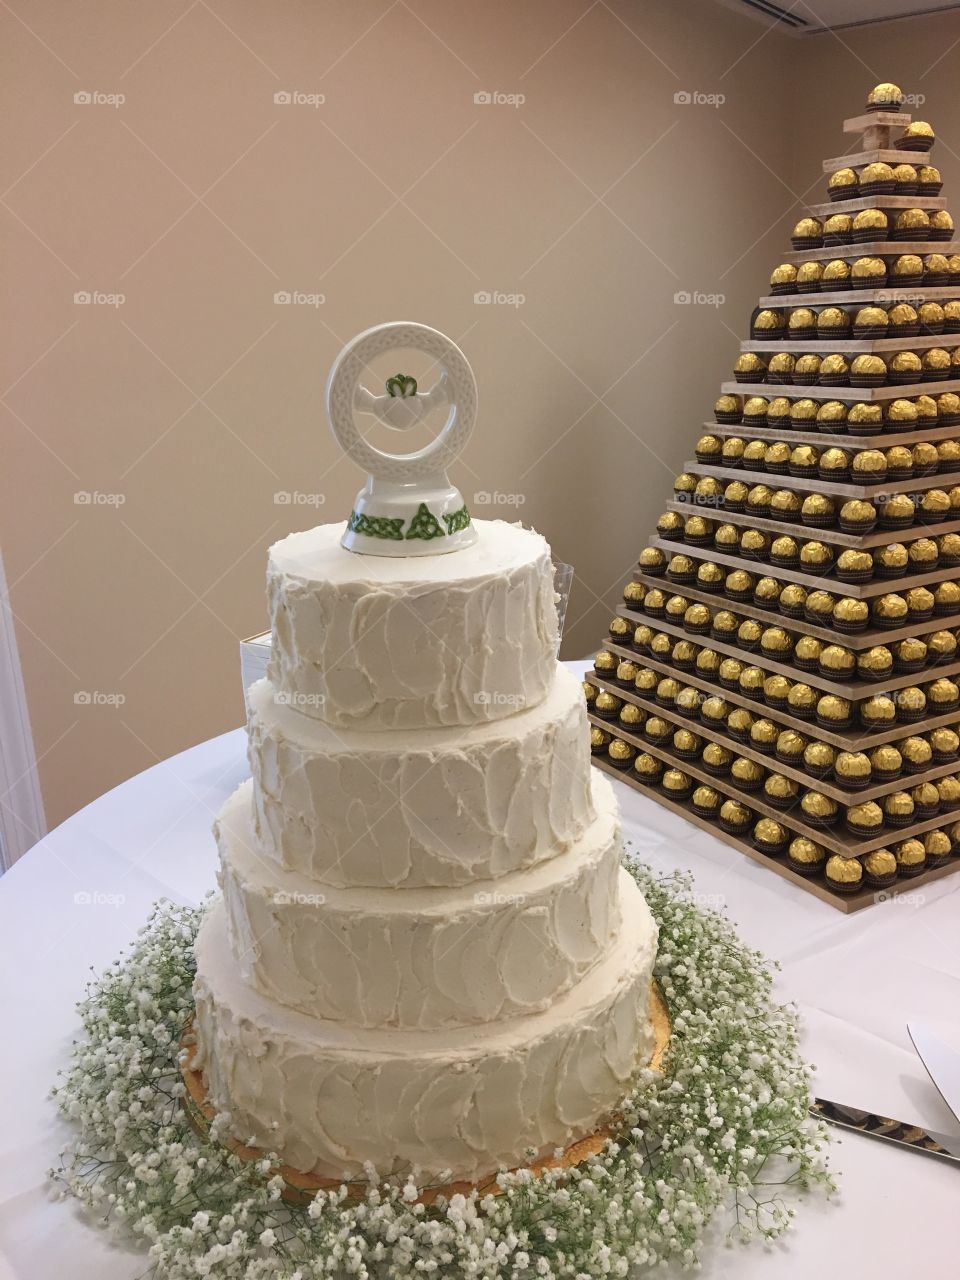 Tiered cake with pyramid 